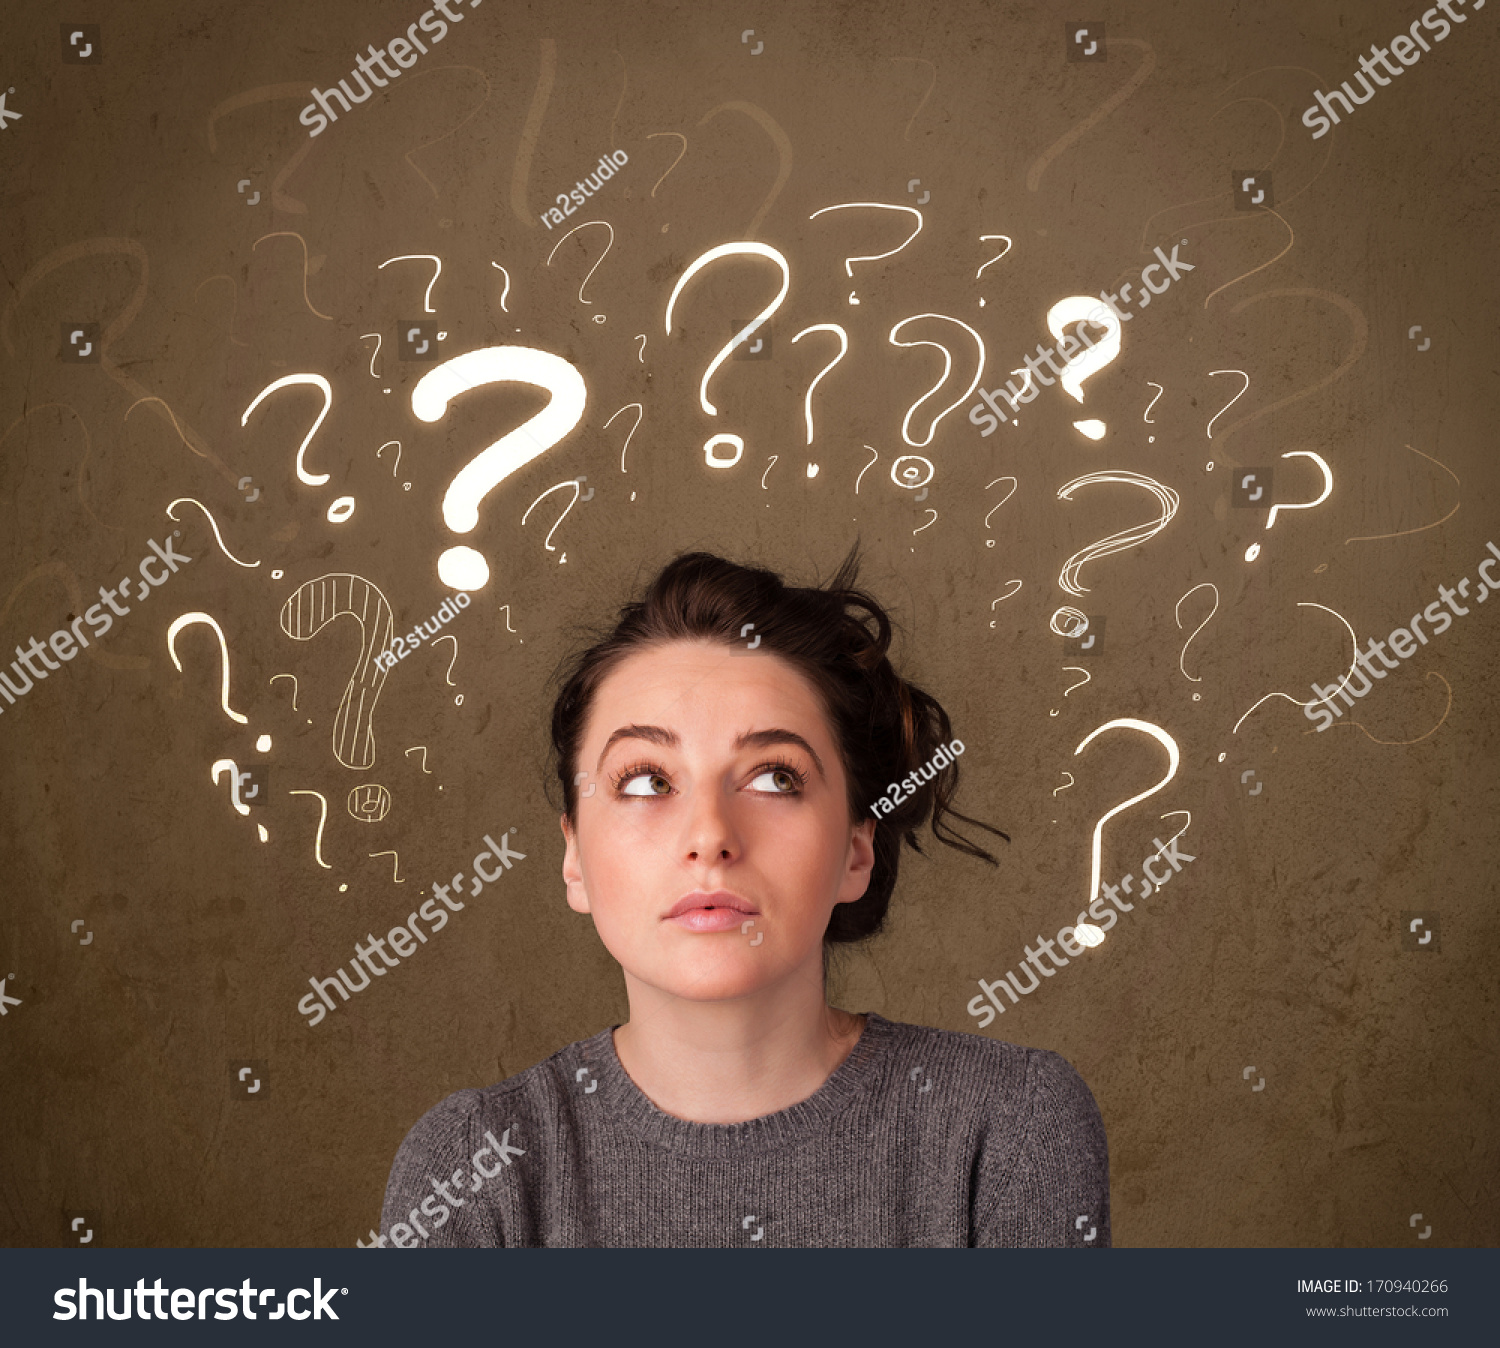 Teenage girl with question mark symbols around her head #170940266